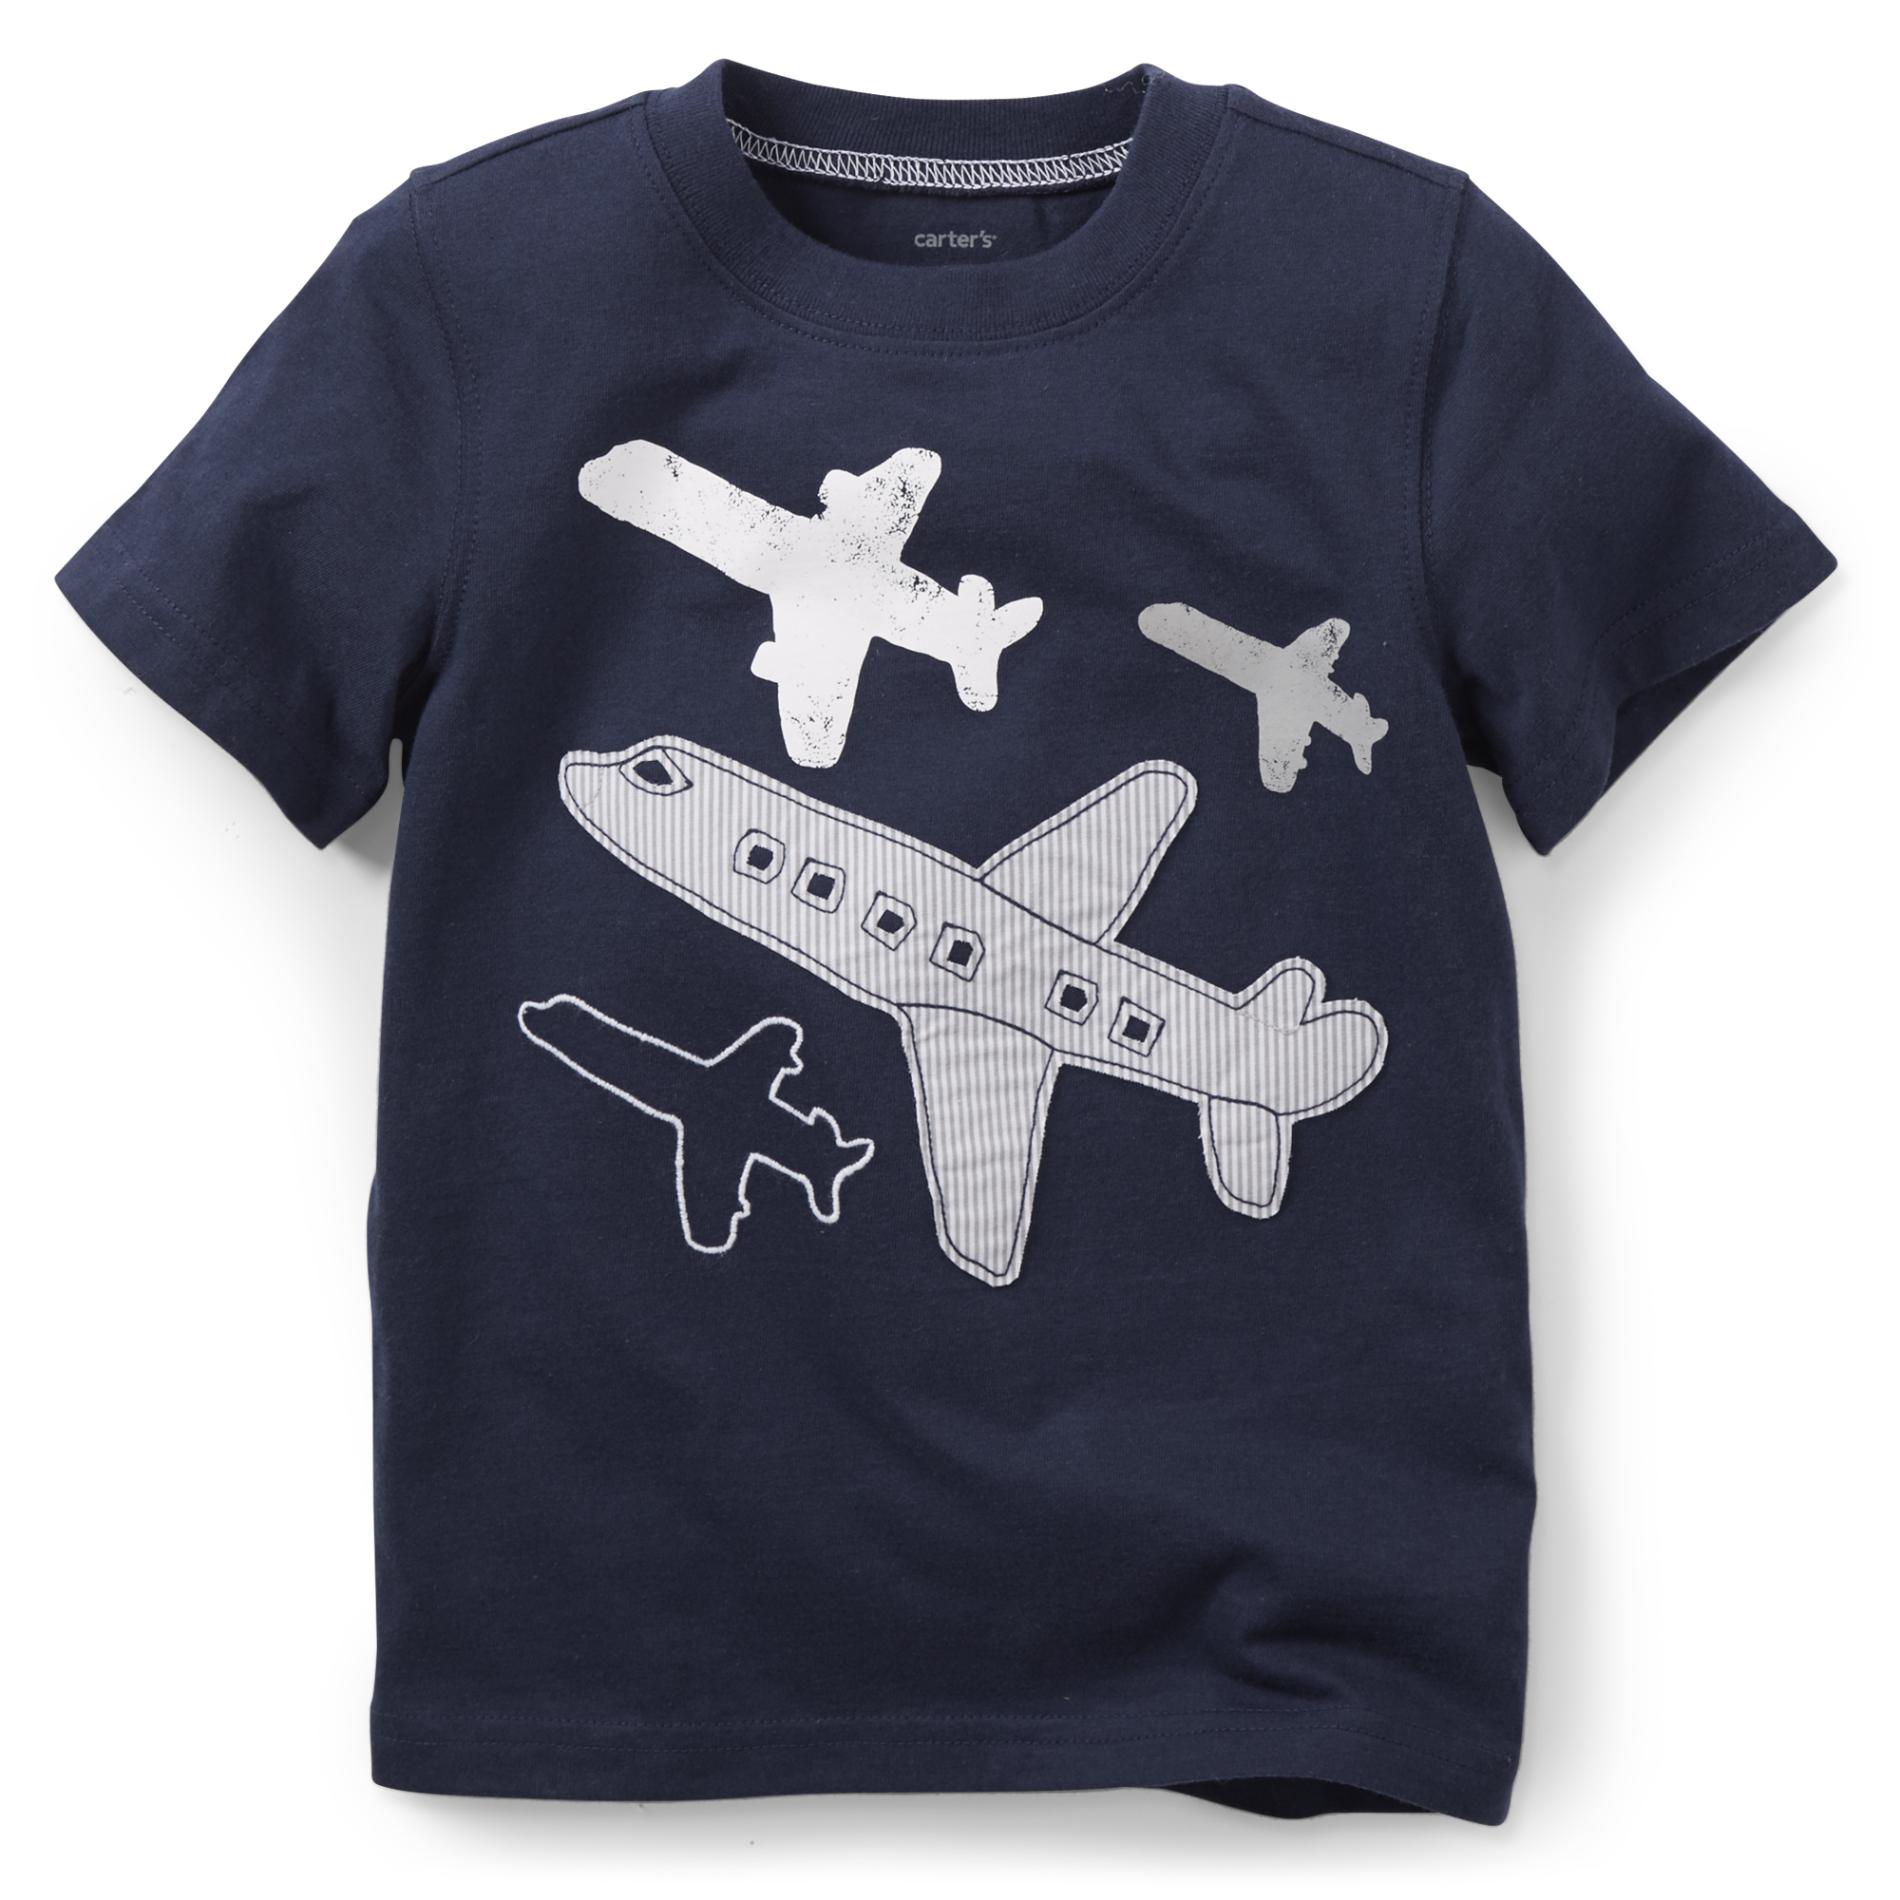 Carter's Toddler Boy's Graphic T-Shirt - Airplanes